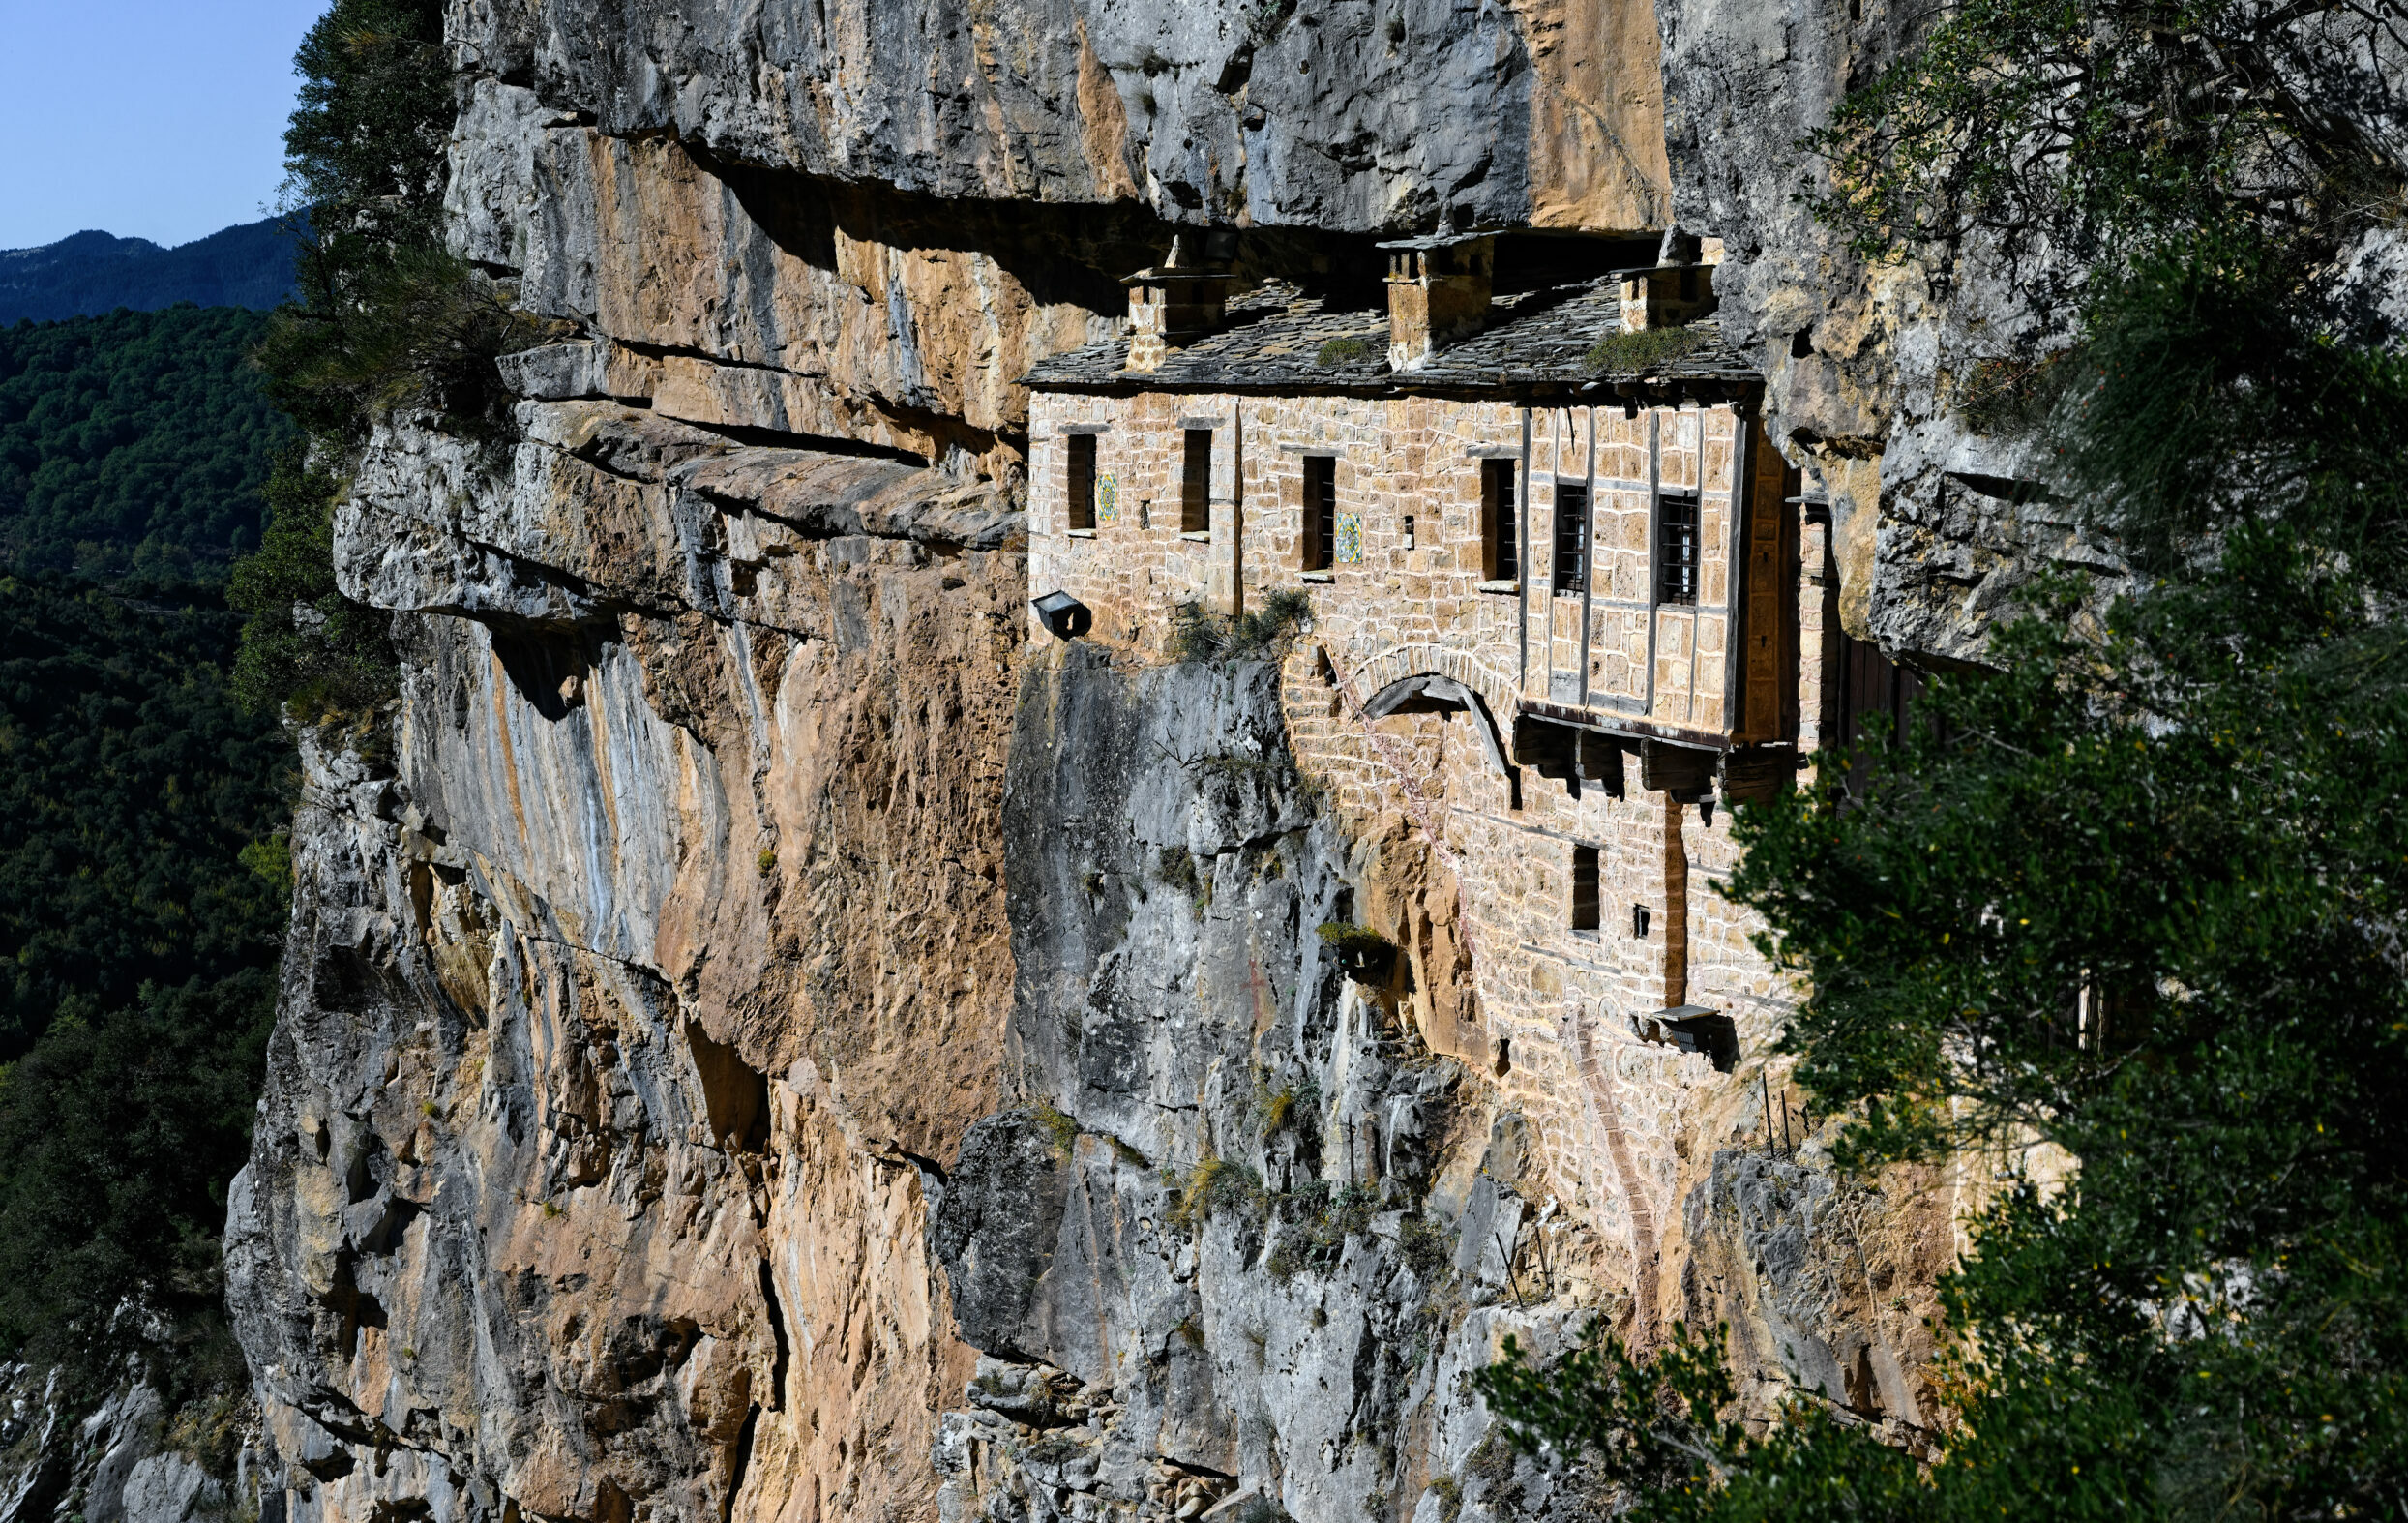 Kipina Monastery: The monastery that is wedged in the rock